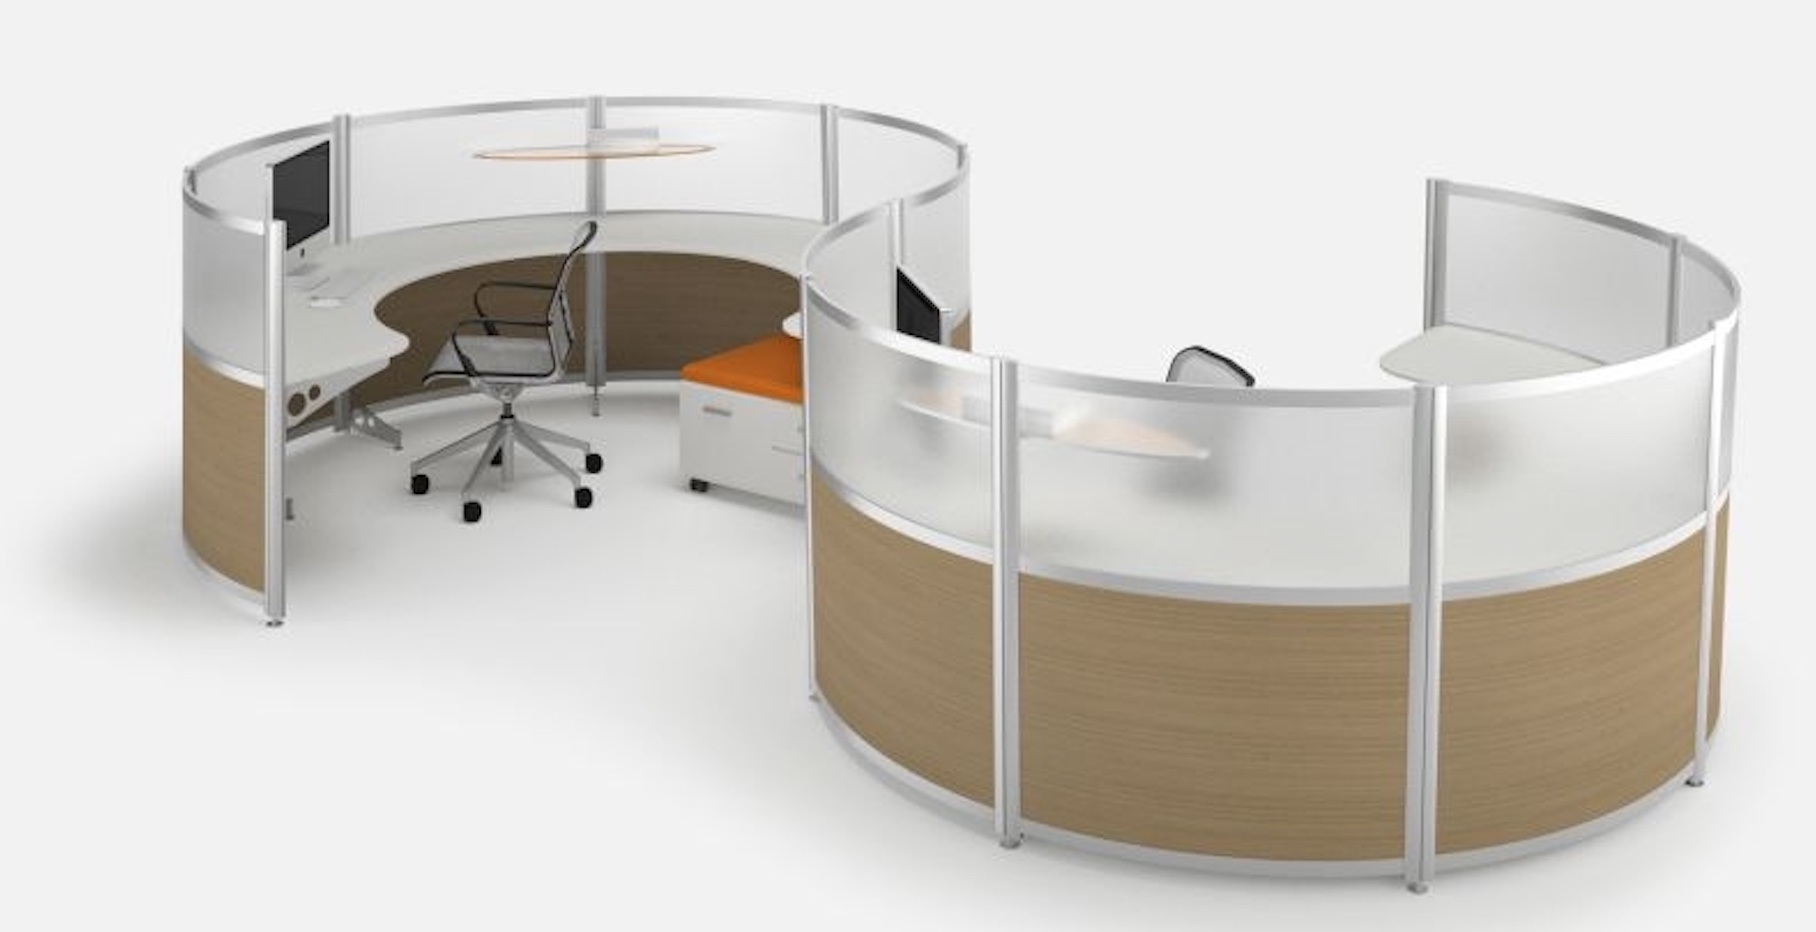 Fluid Concepts Orbit Workstation semi circular two linked stations with wood laminate